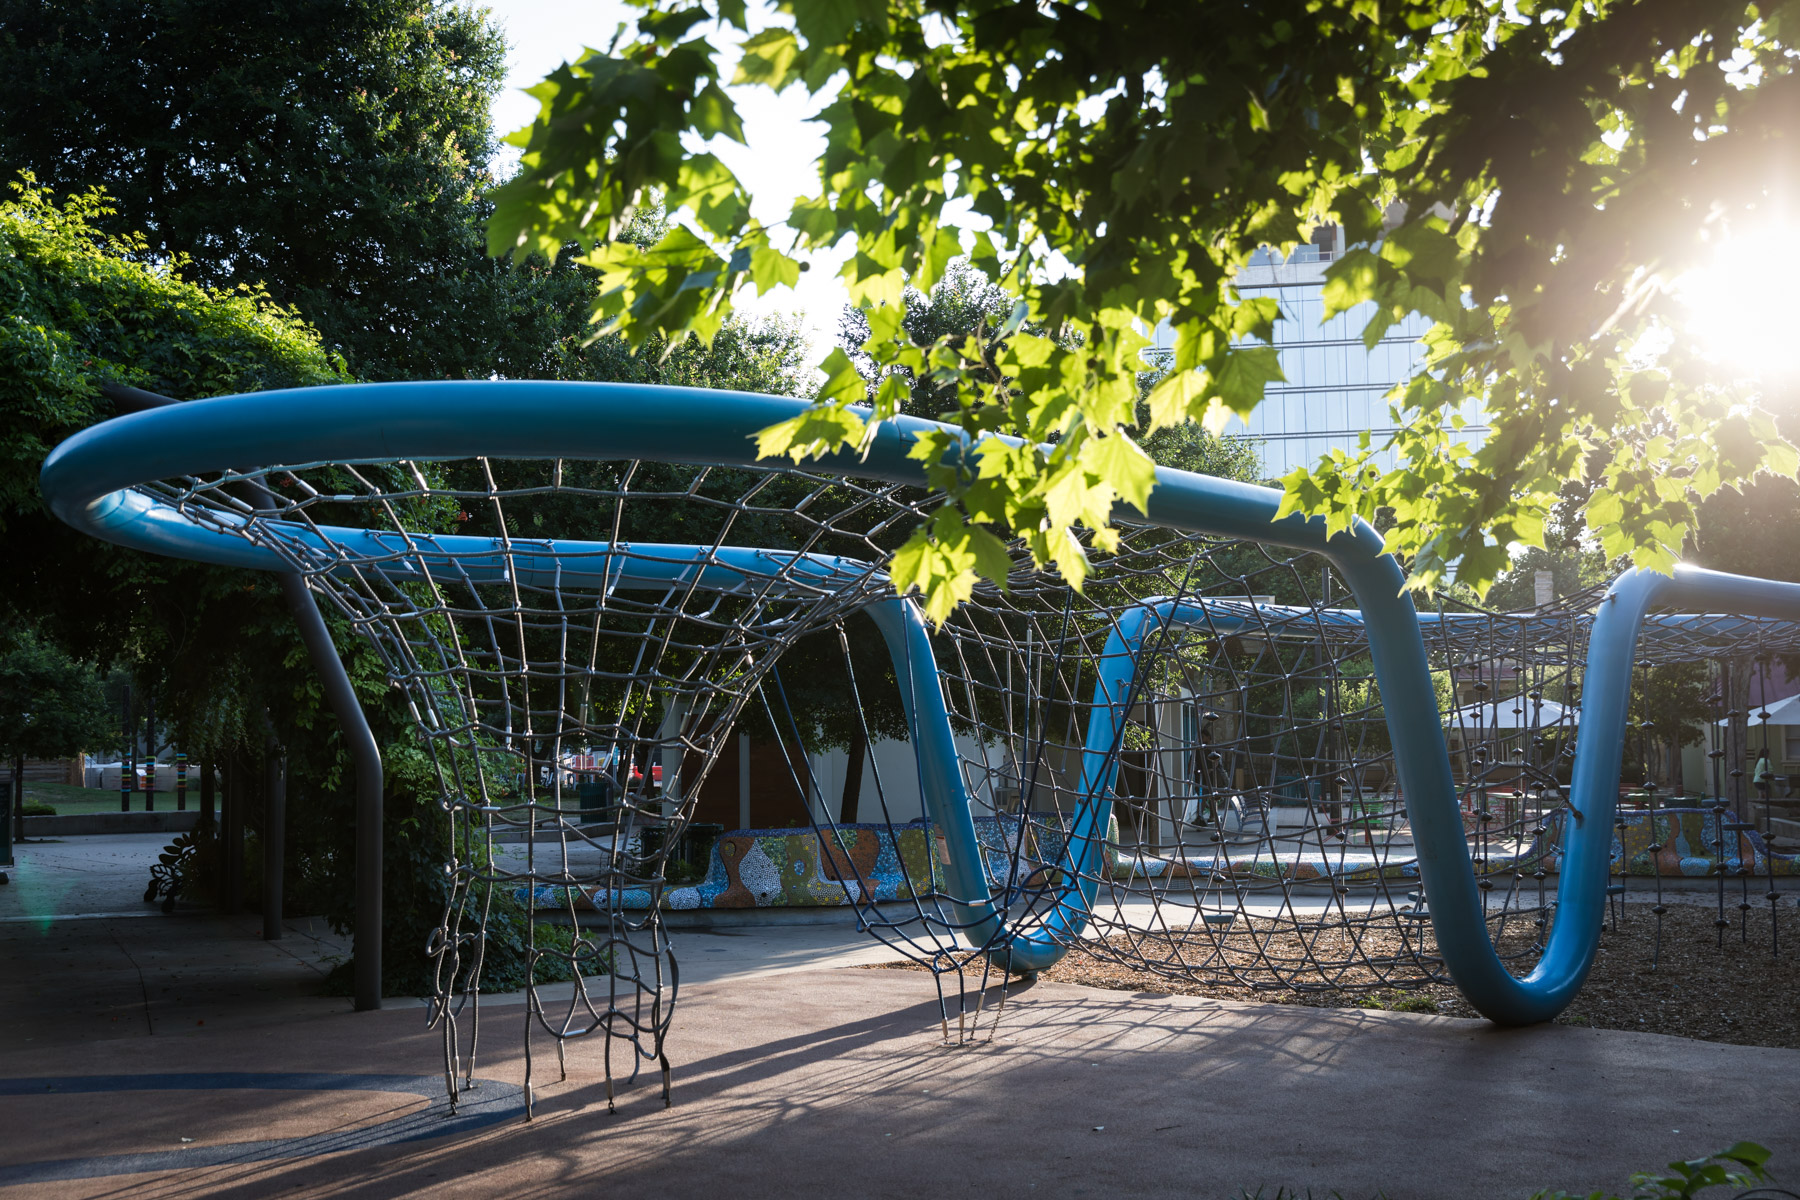 Playground sculpture with net and blue tubing with trees in Yanaguana Garden in Hemisfair for an article on the perfect downtown San Antonio family portrait itinerary